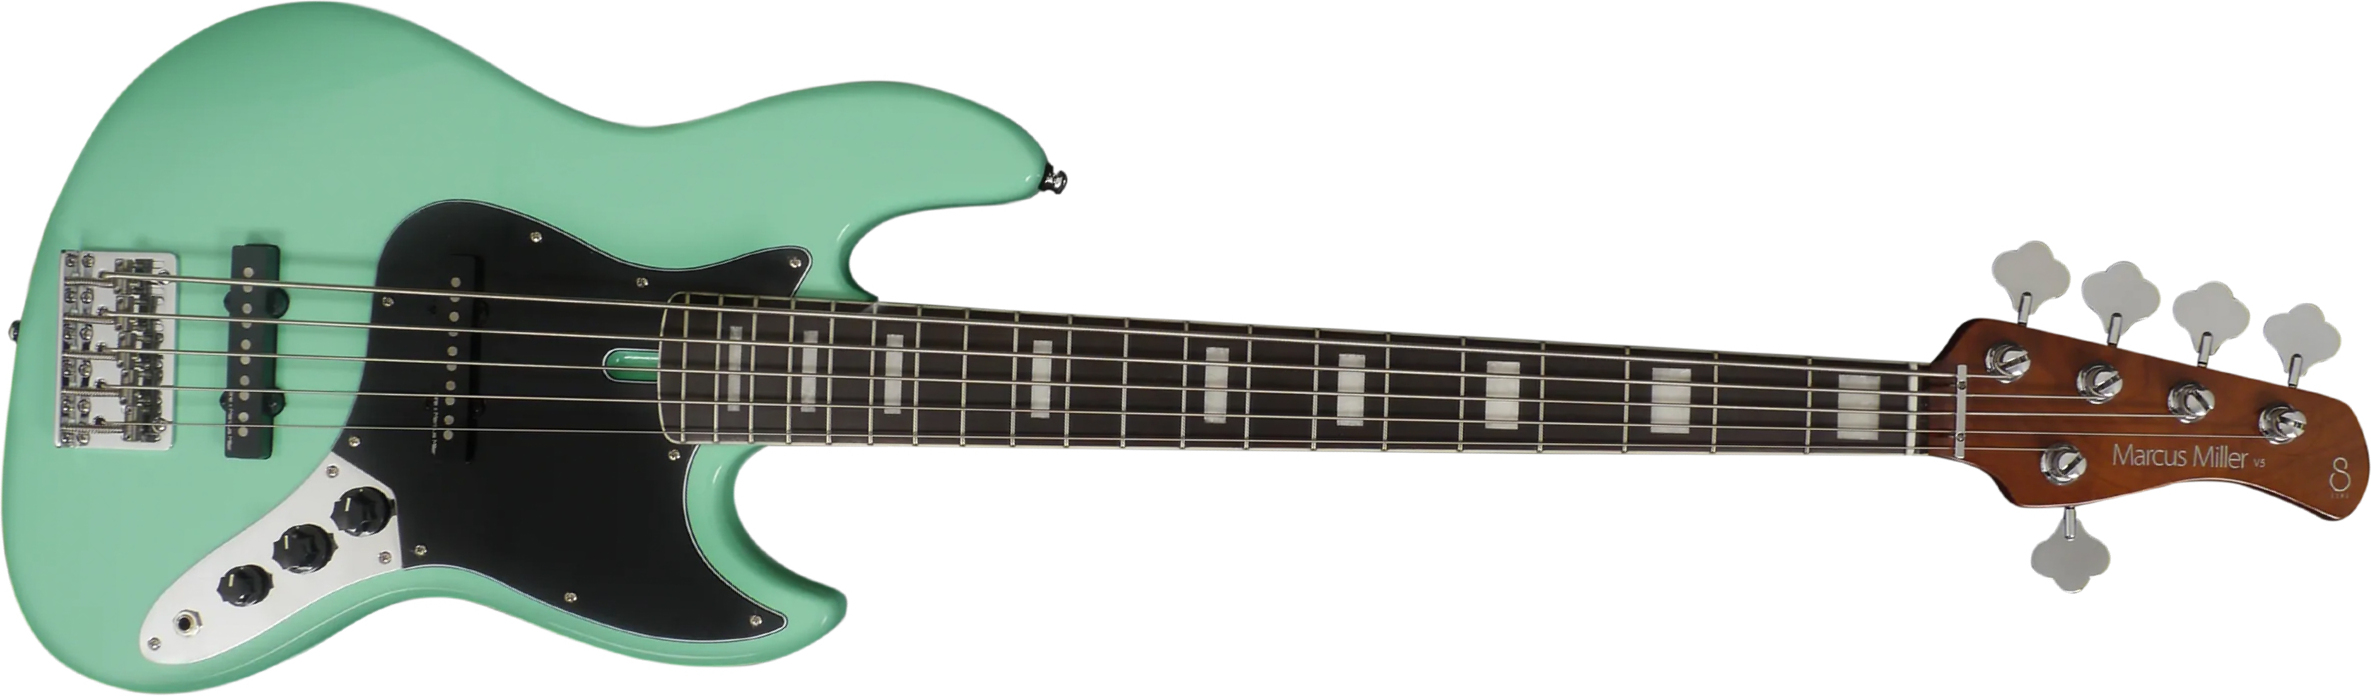 Marcus Miller V5r 5st 5c Rw - Mild Green - Solid body electric bass - Main picture